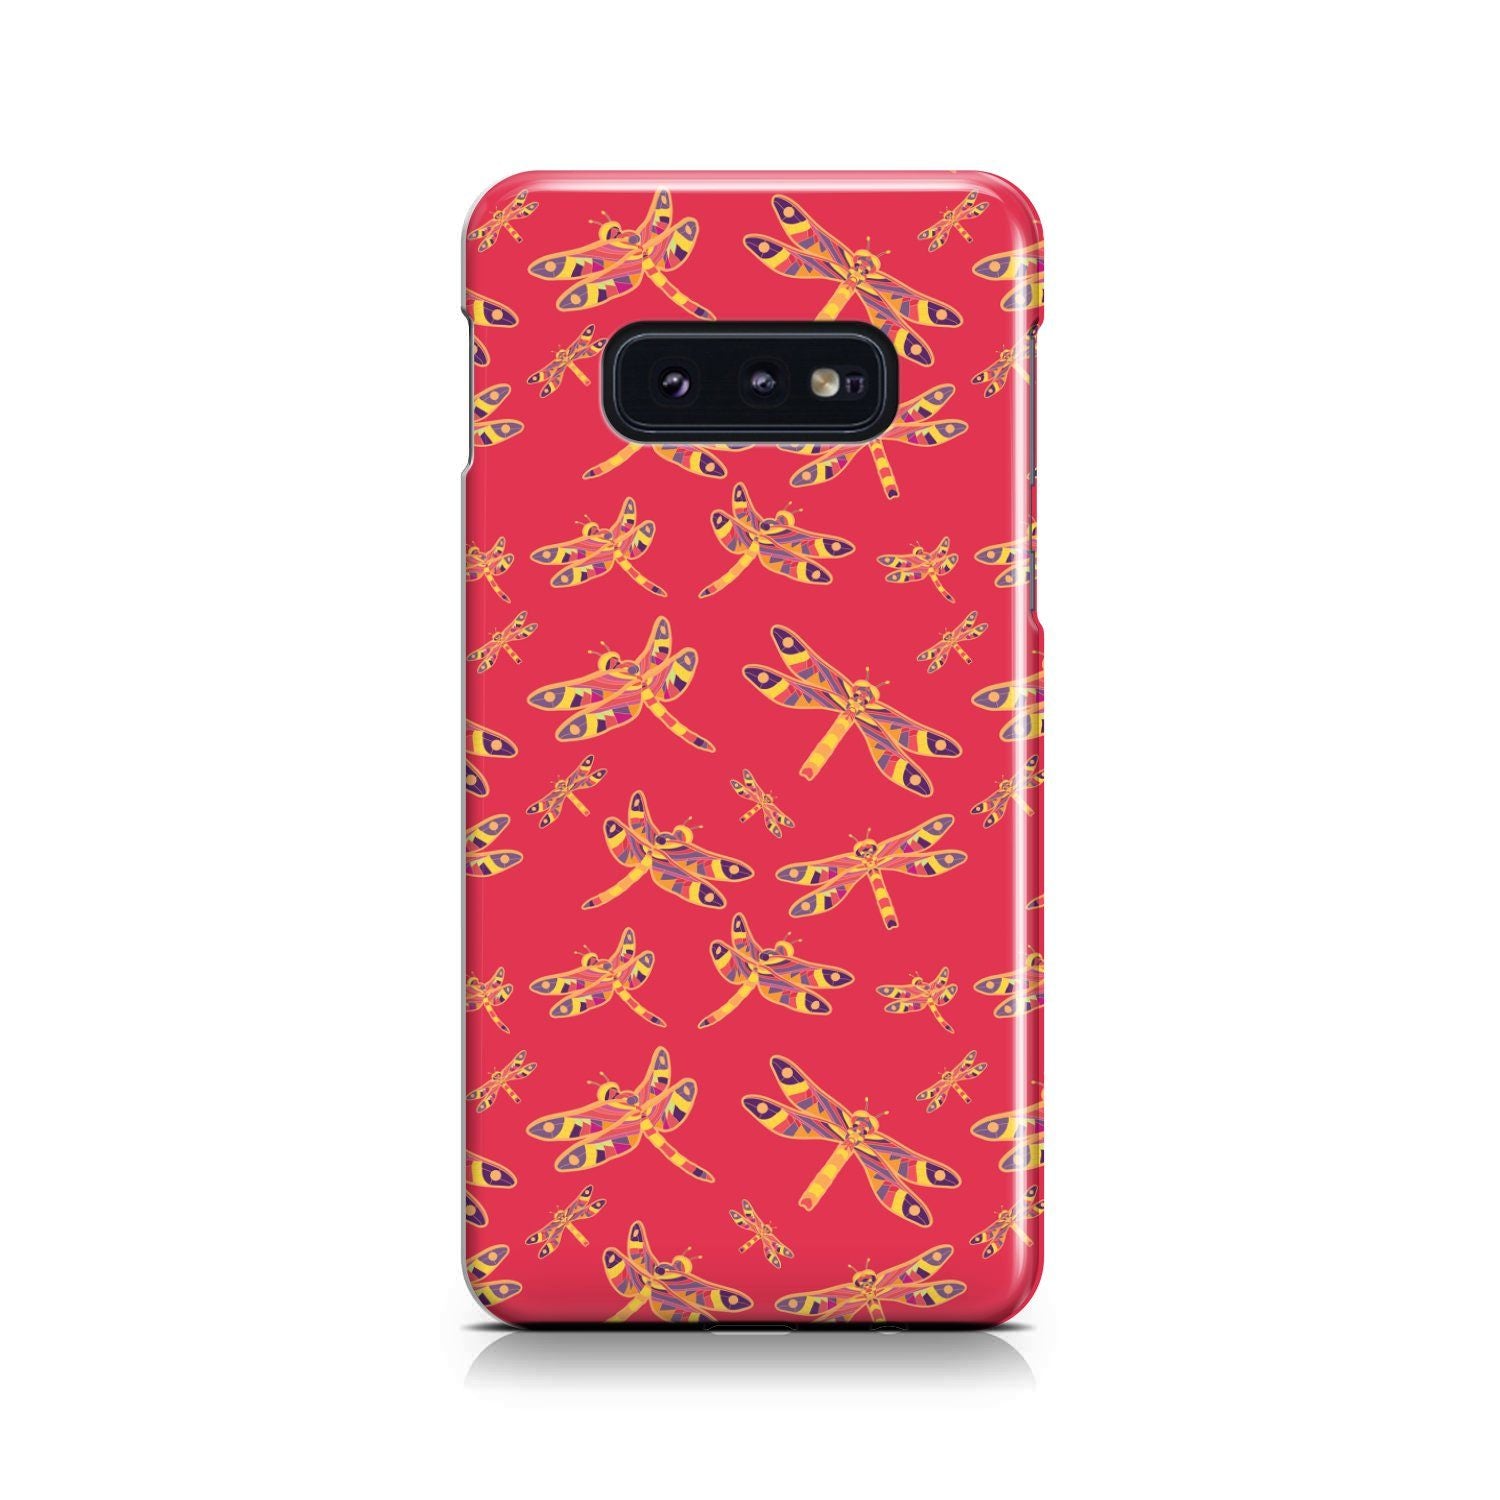 Gathering Rouge Phone Case Phone Case wc-fulfillment Samsung Galaxy S10e 